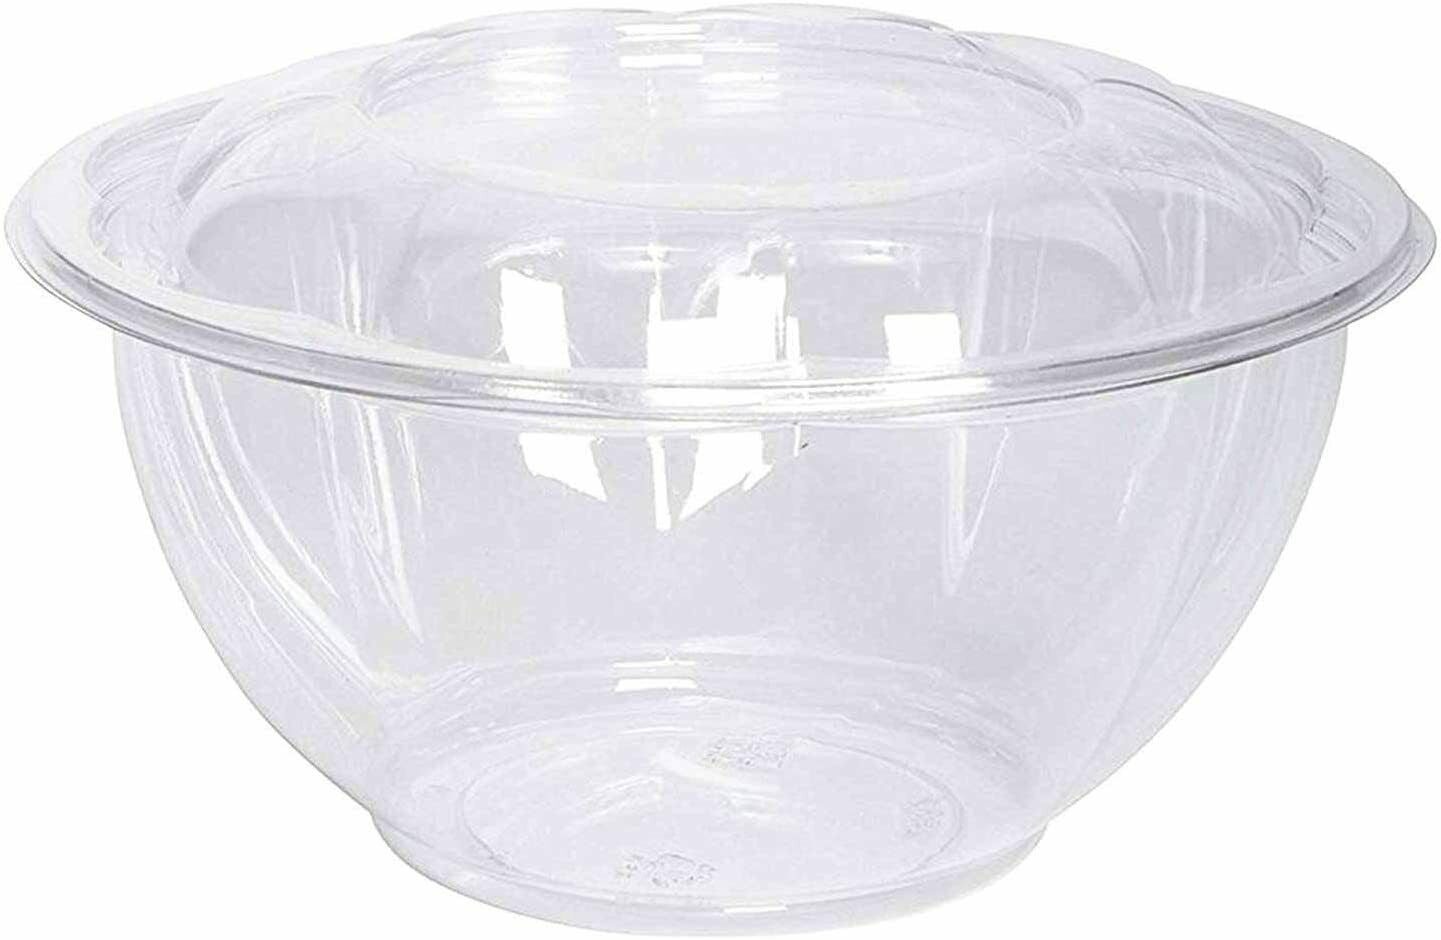 32oz Salad Bowls To-Go with Lids (300 Count) - Clear Plastic Disposable  Salad Containers | Airtight, Lunch, Salads, Parfait, Fruits, Leak Proof